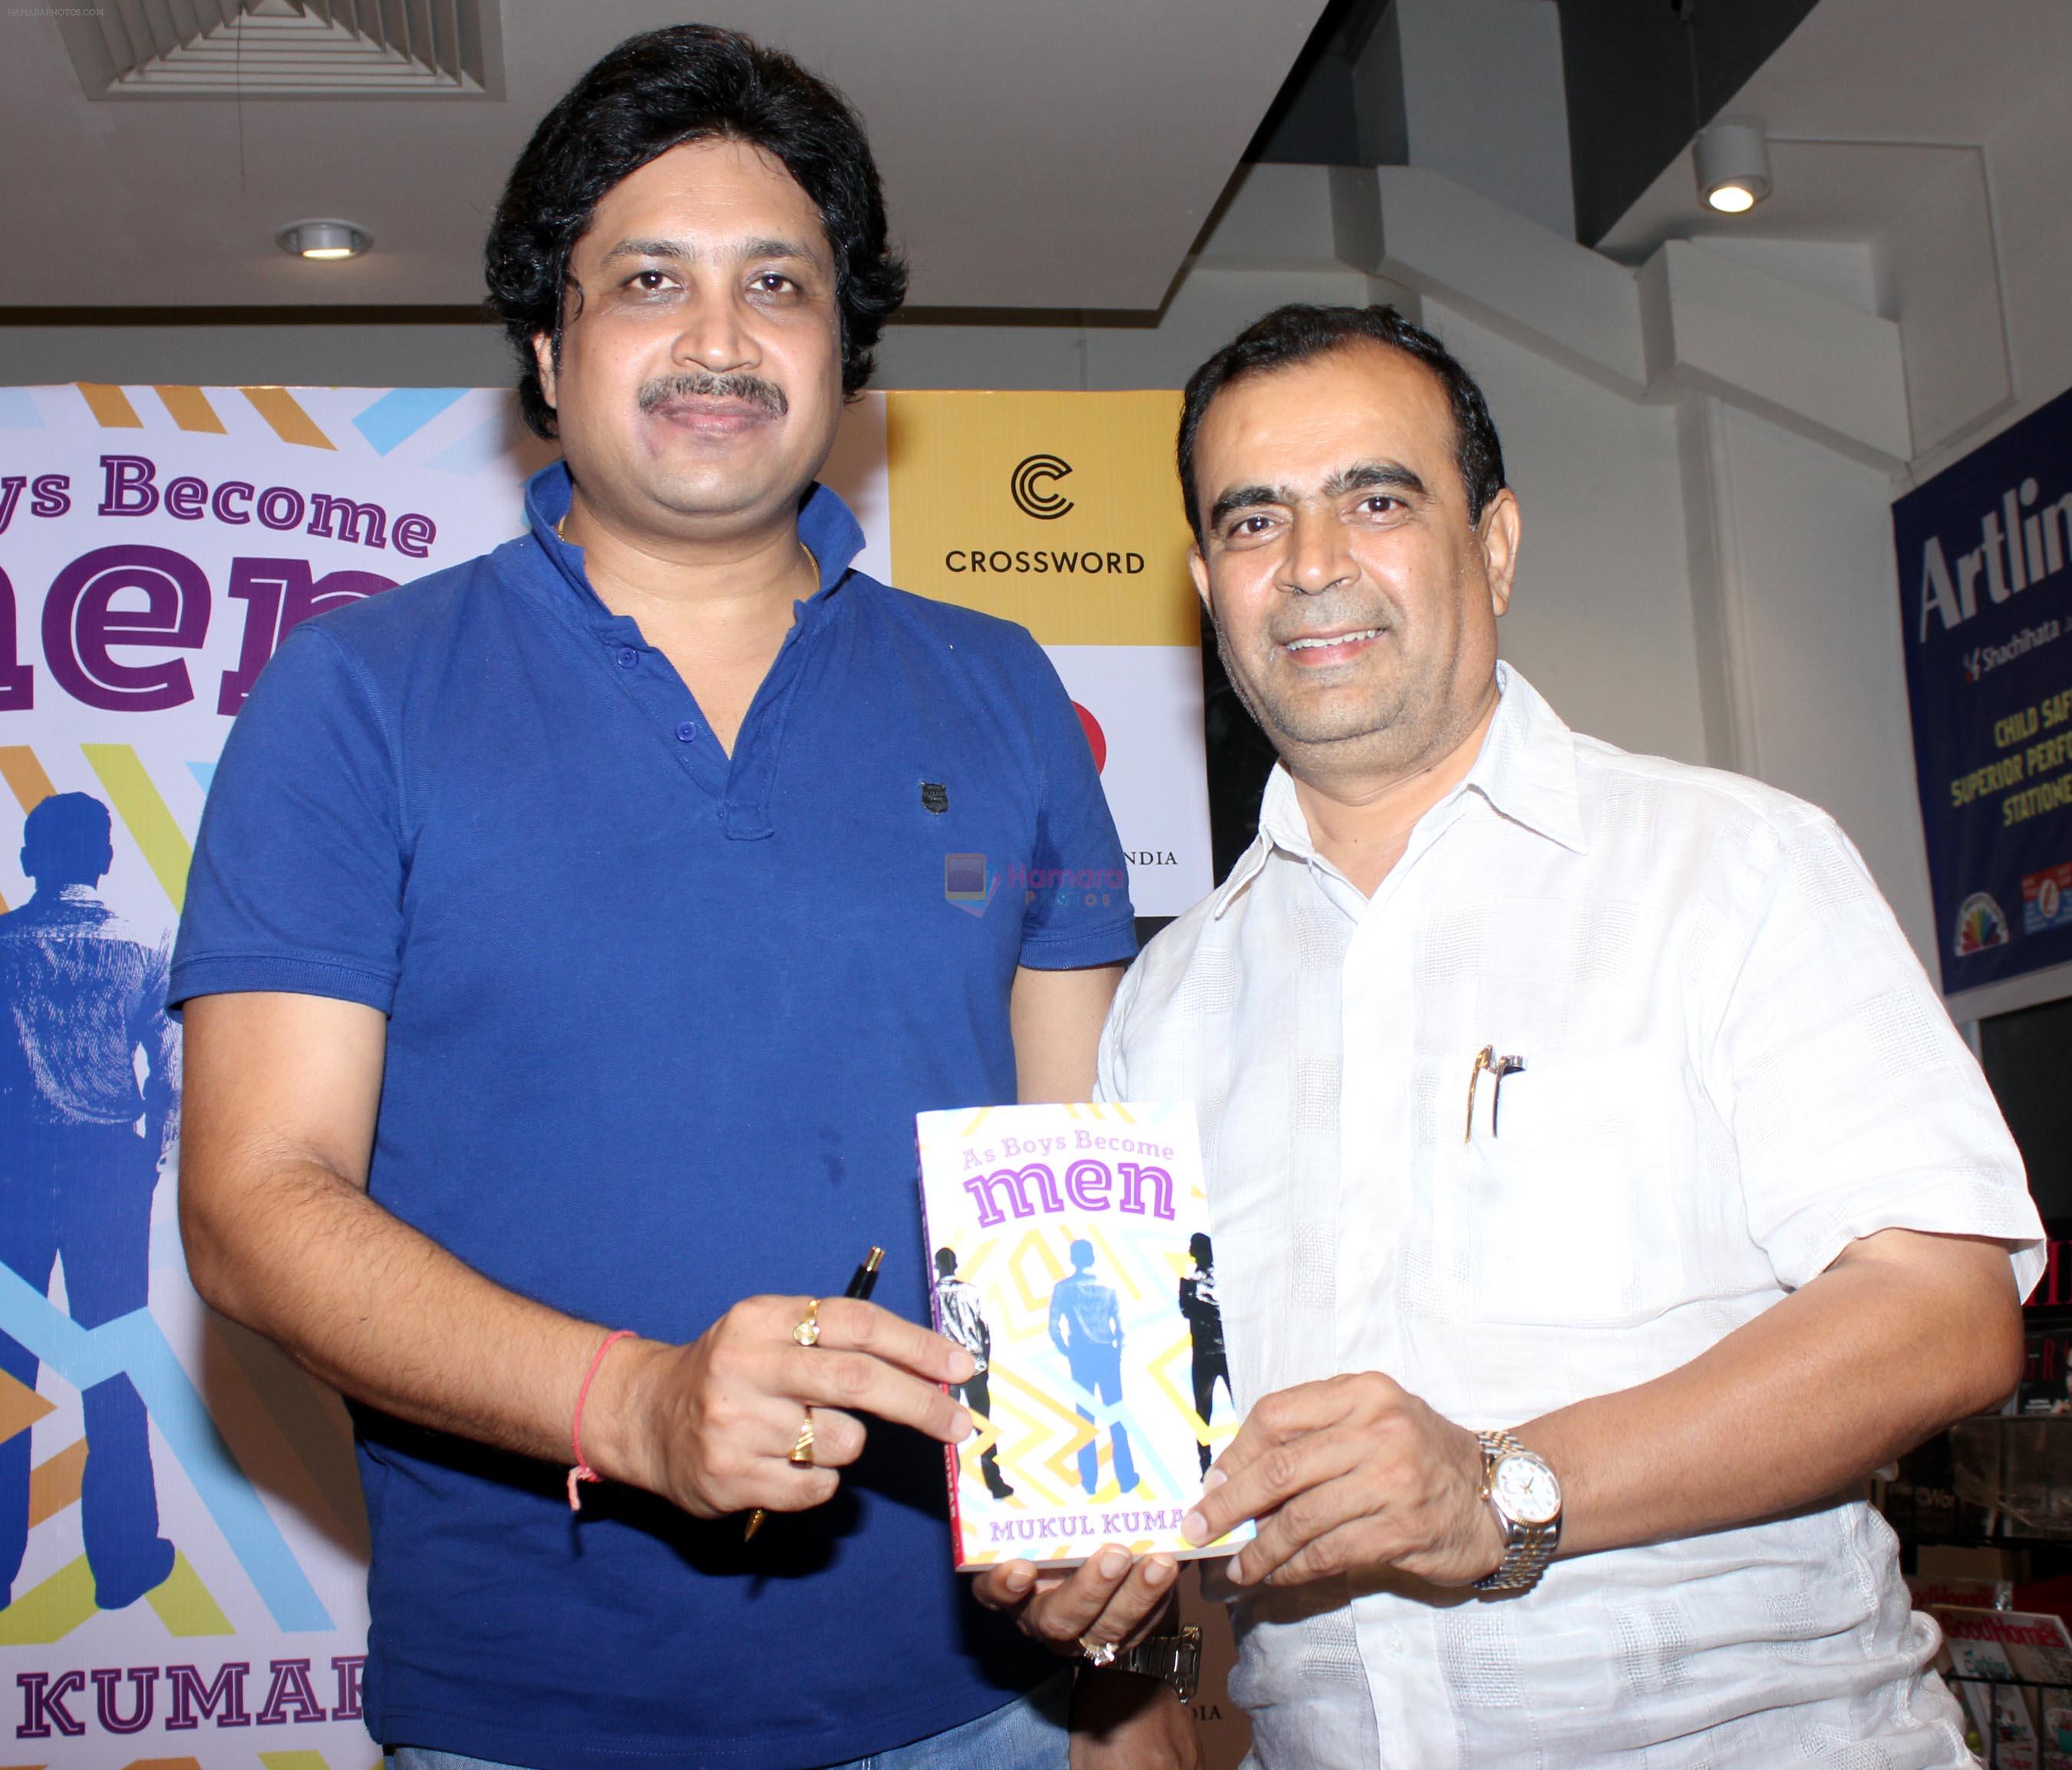 mukul kumar & yogesh lakhani at the launch of book As Boy become Men written by Indian railway officer Mukul Kumar in Crosswords on 6th April 2016